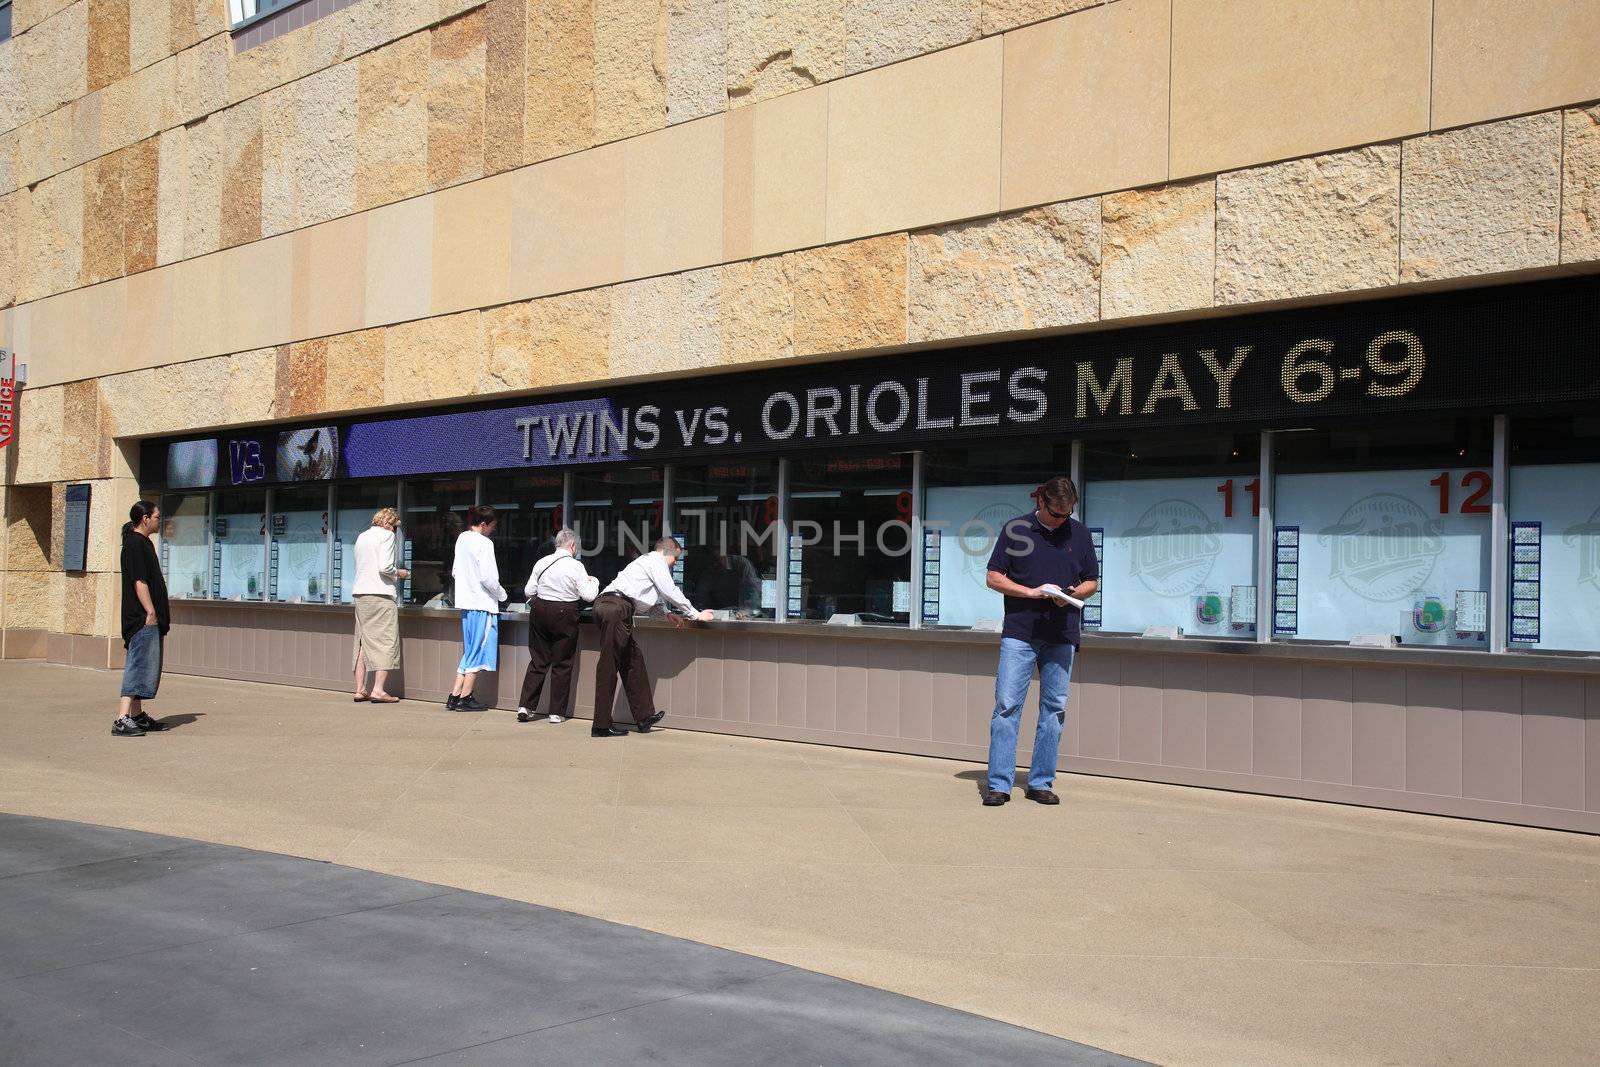 Fans line up at ticket booths for game against the Cleveland Indians at the new outdoor Twin Cities stadium